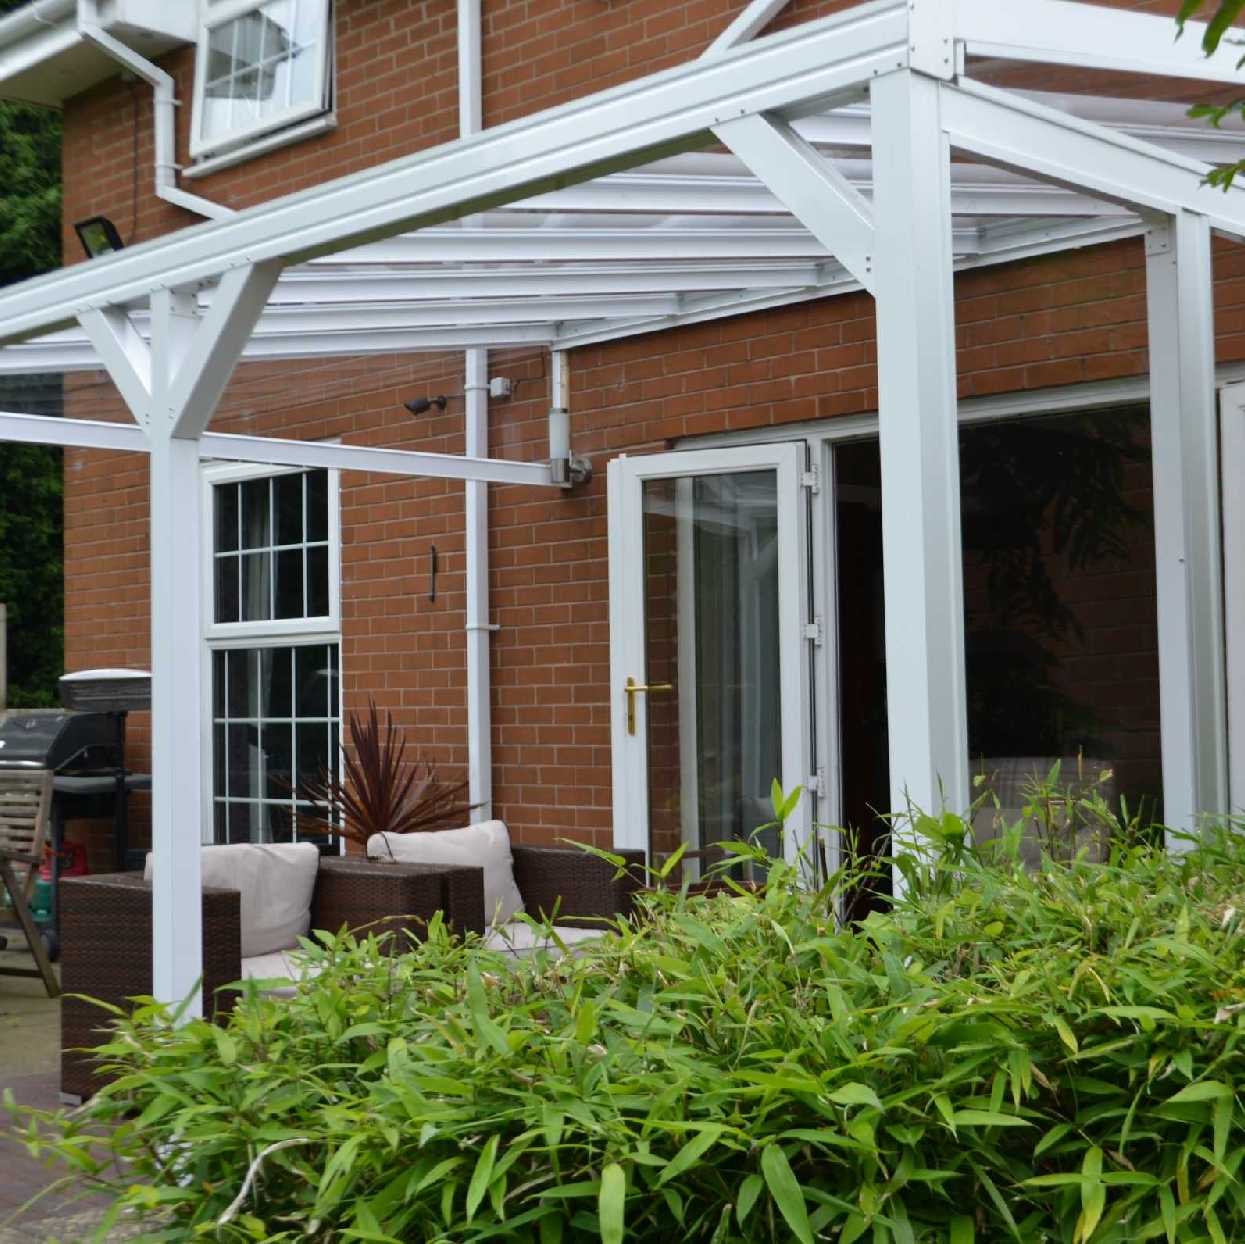 Omega Smart Lean-To Canopy, White UNGLAZED for 6mm Glazing - 10.5m (W) x 2.5m (P), (5) Supporting Posts from Omega Build